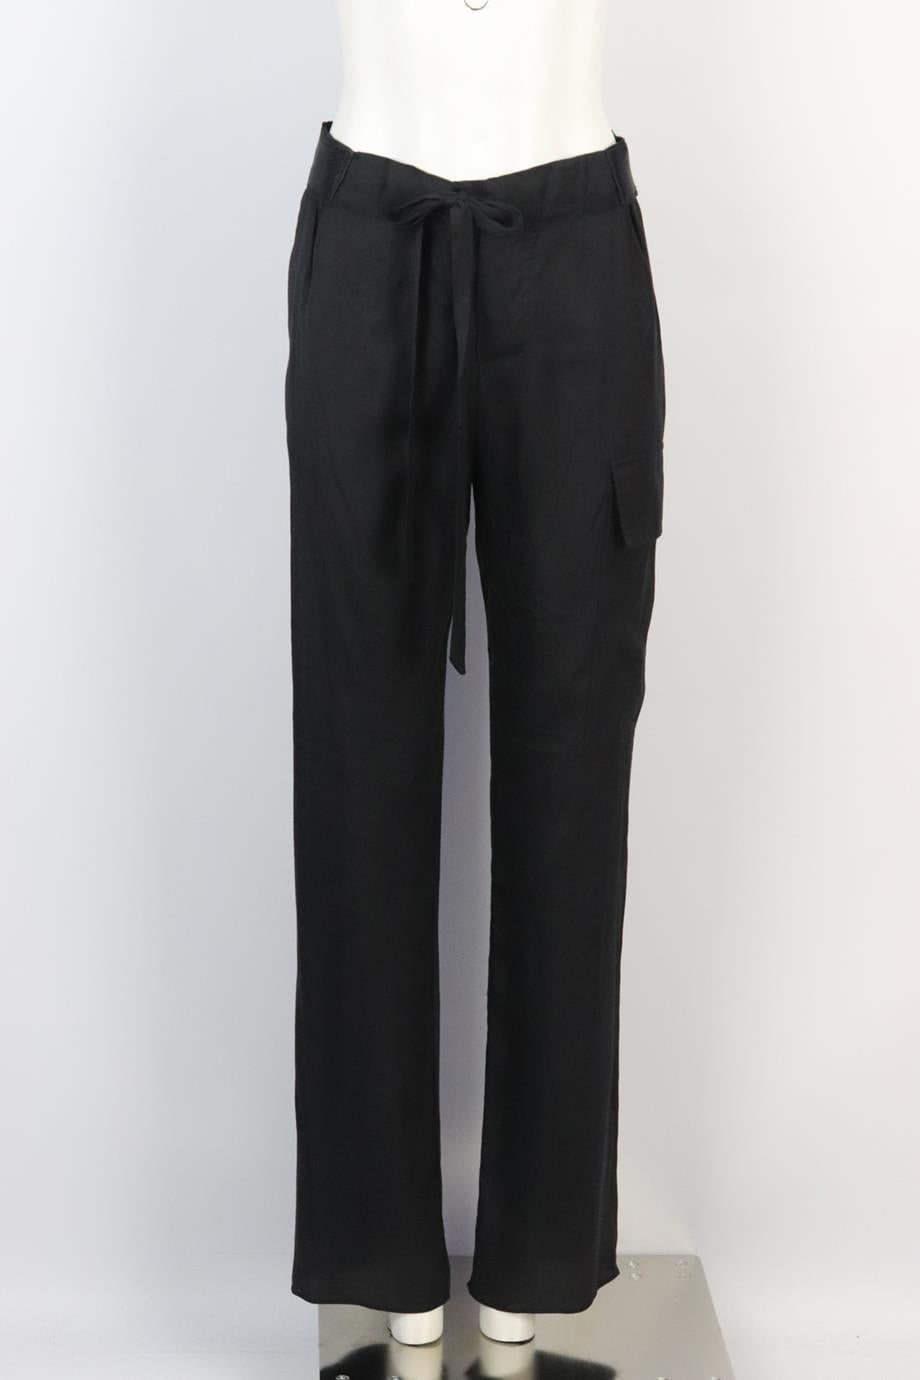 Tom Ford woven straight leg pants. Black. Button fastening at front. 100% Viscose; details: 100% leather. Size: IT 38 (UK 6, US 2, FR 34). Waist: 31 in. Hips: 41 in. Length: 45 in. Inseam: 34 in. Rise: 12 in. Very good condition - Some small pulls